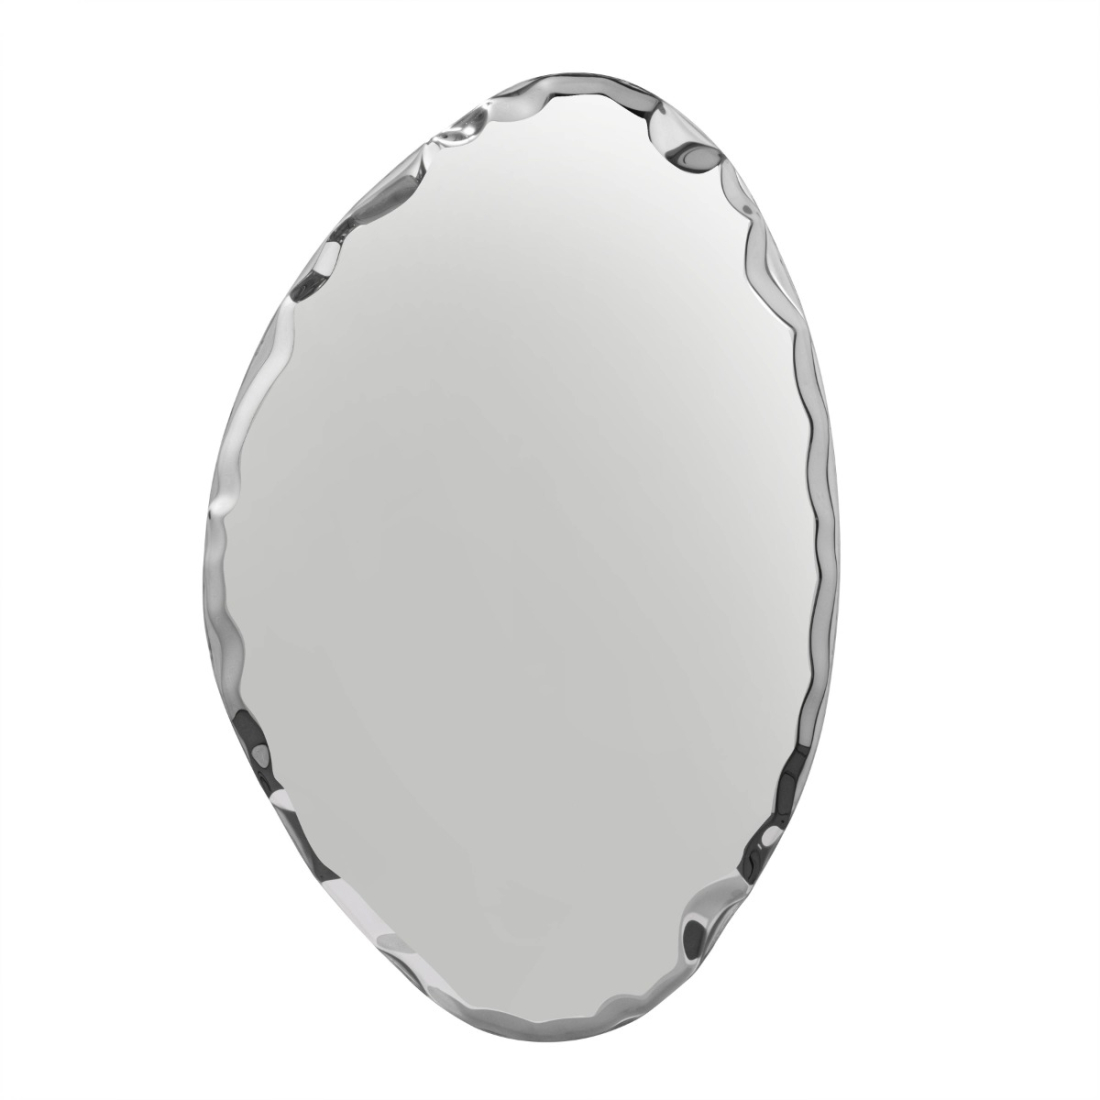 Tafla Abstract Wall Mounted Polished Stainless Steel Elliptic Drop Mirror | Modern Furniture